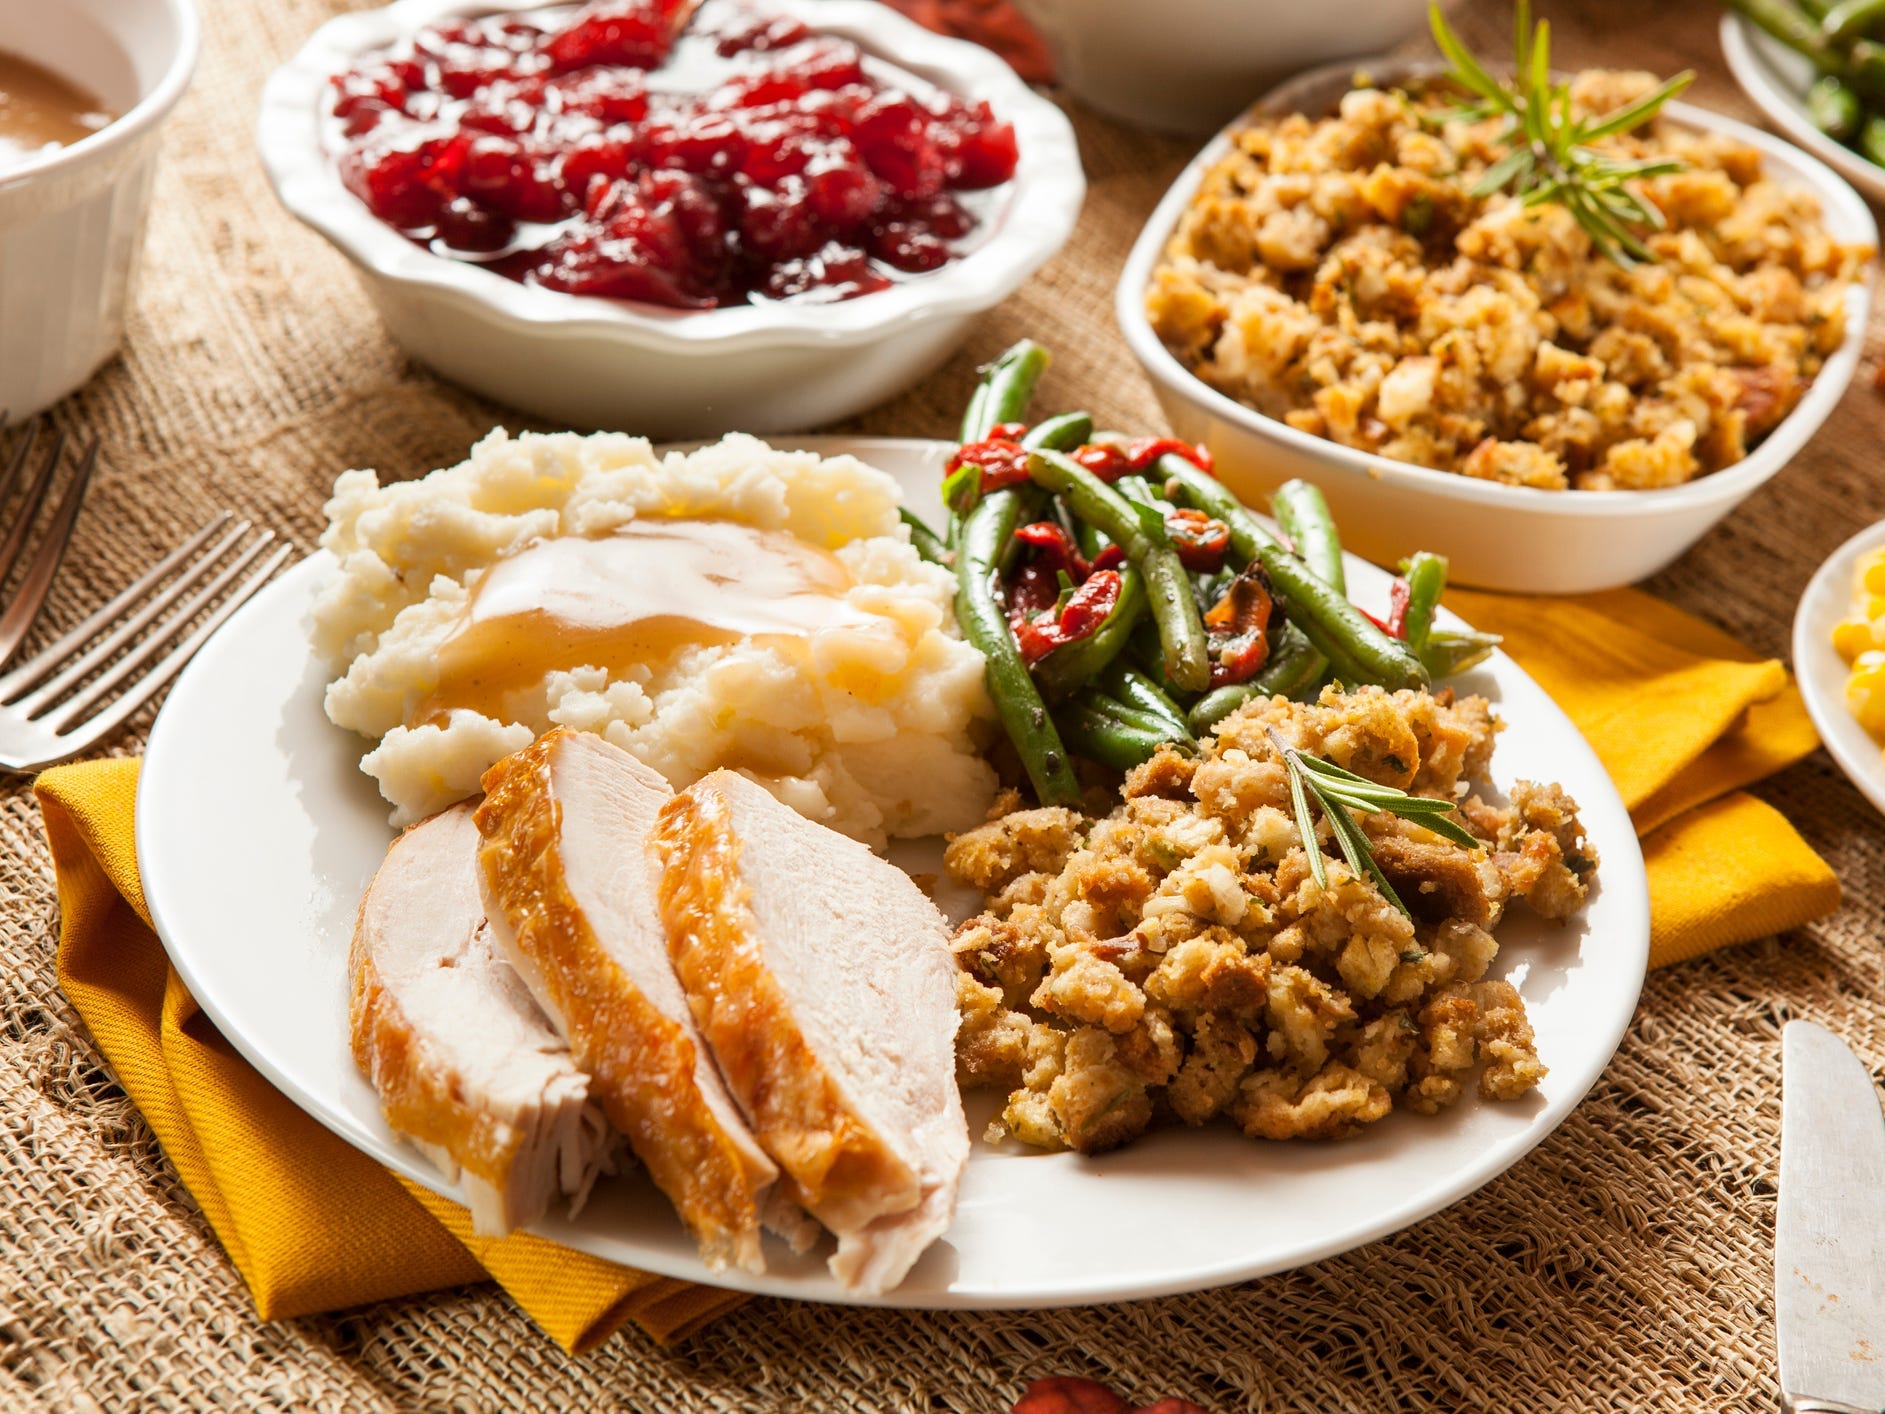 A classic Thanksgiving dinner with spiced turkey, stuffing, mashed potatoes, and green beans